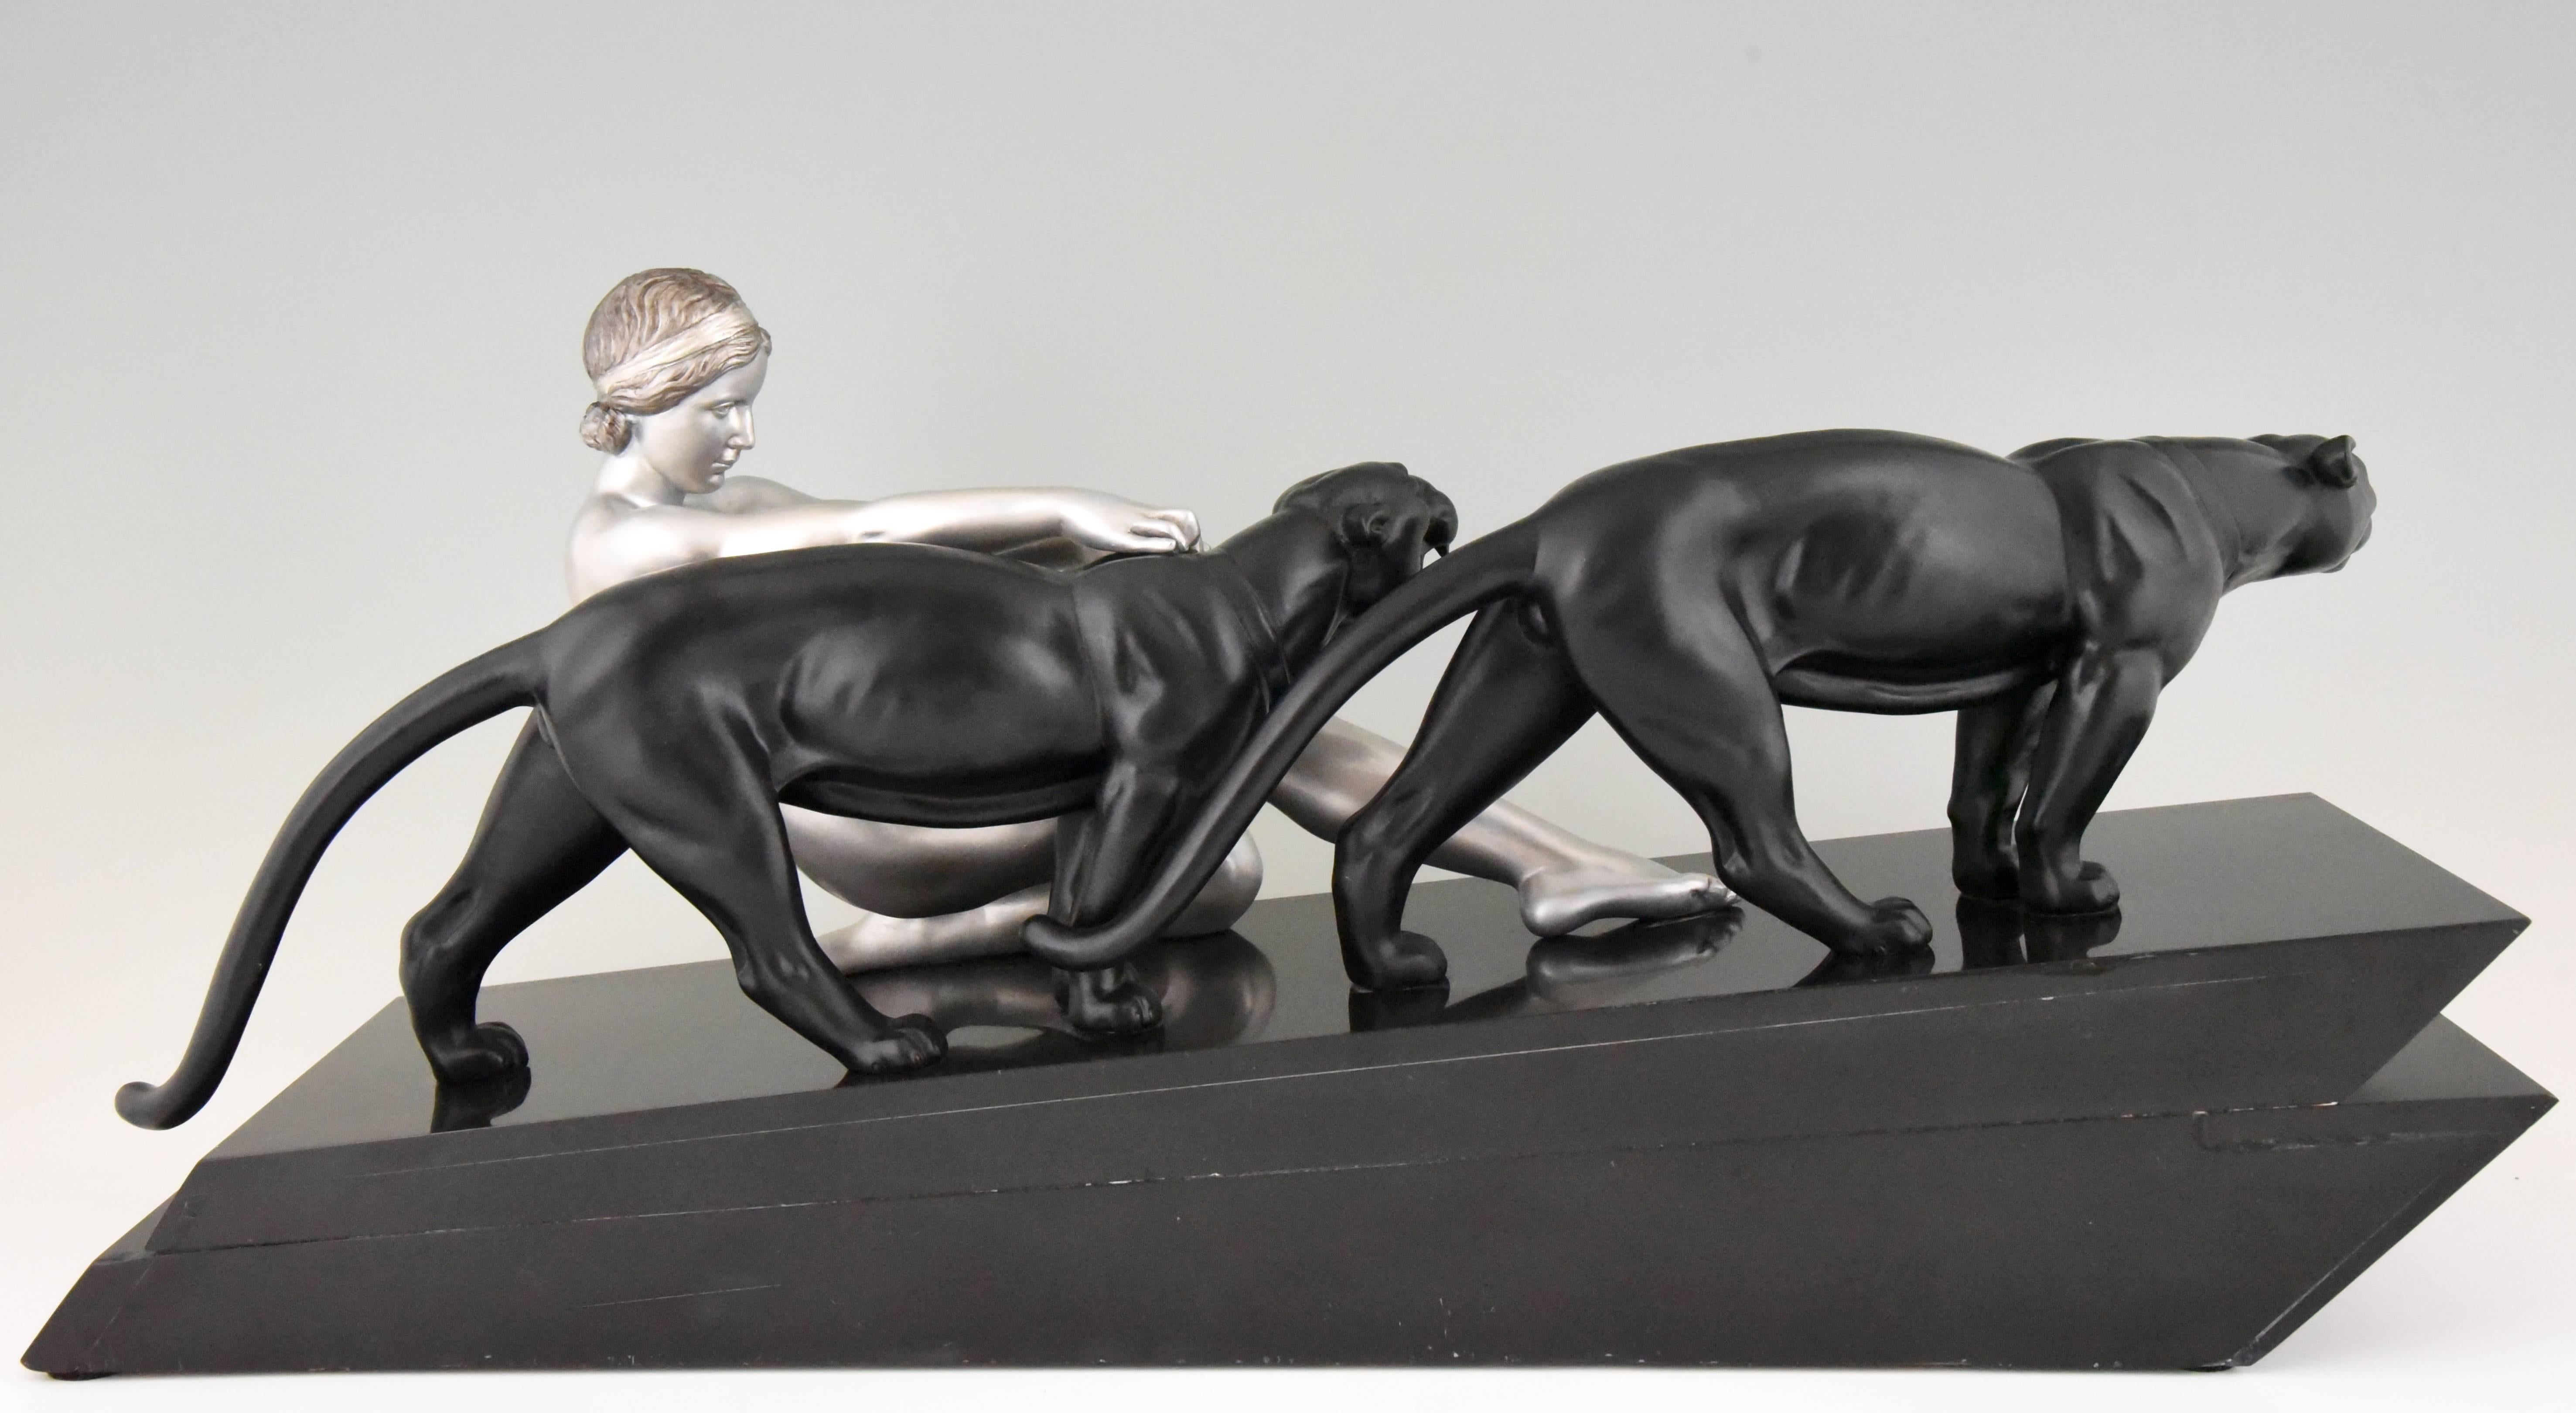 Mid-20th Century Art Deco Sculpture Nude with Two Panthers Alexandre Ouline France 1930 Original